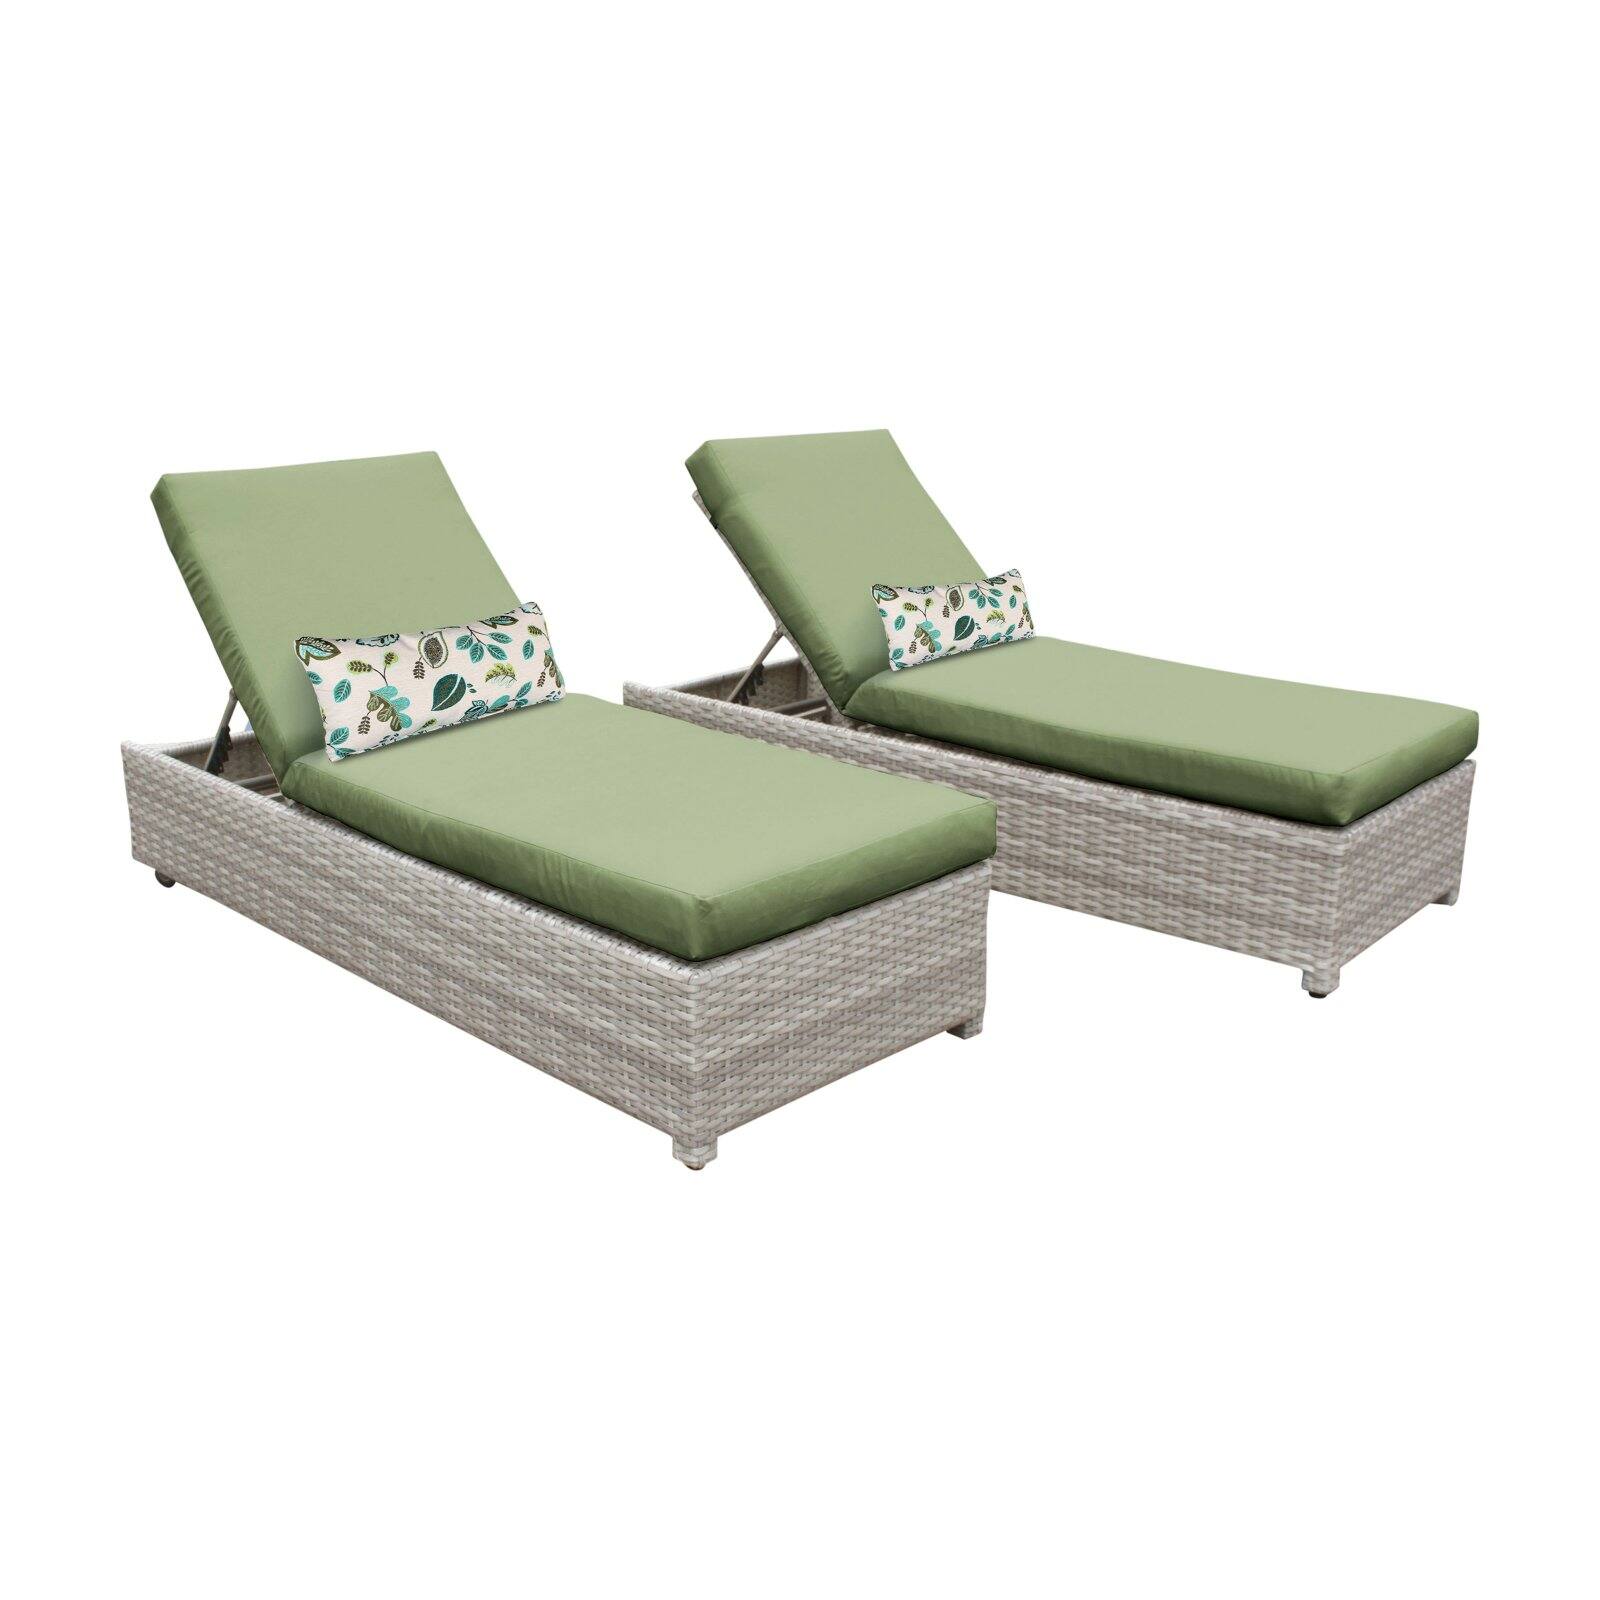 TK Classics Fairmont Wheeled Wicker Outdoor Chaise Lounge Chair - Set of 2 - image 2 of 11